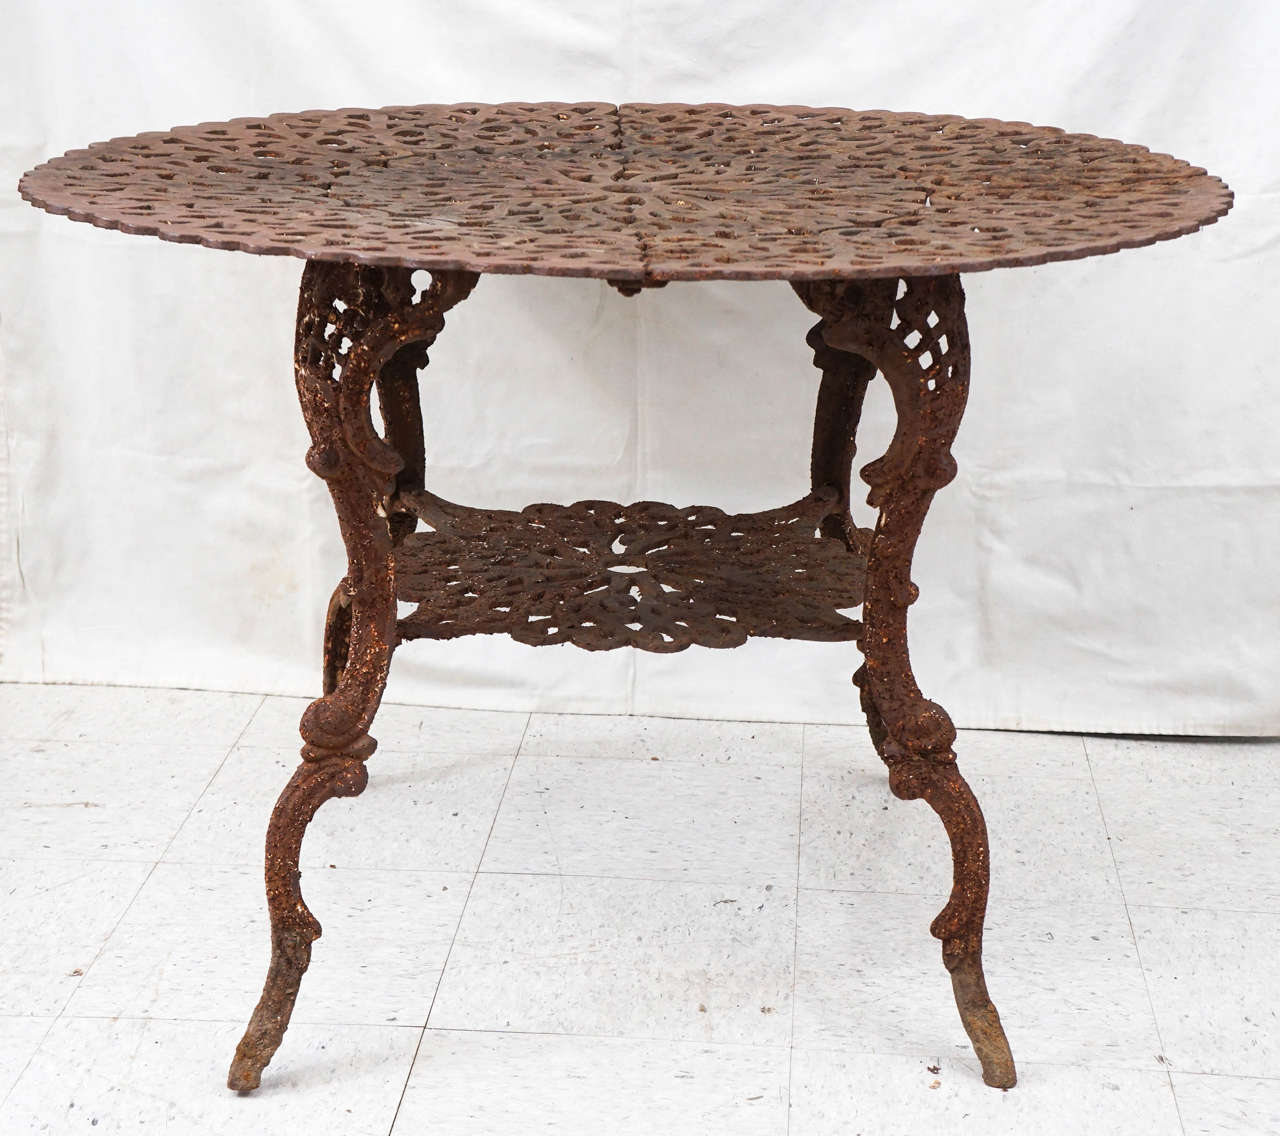 This table, most often seen as an example remake from the 1940s and 1950s, is an origin example from the 1880s the table was purchased from a well established upstate New York garden and has been in place for over 75 years. The surface is completely